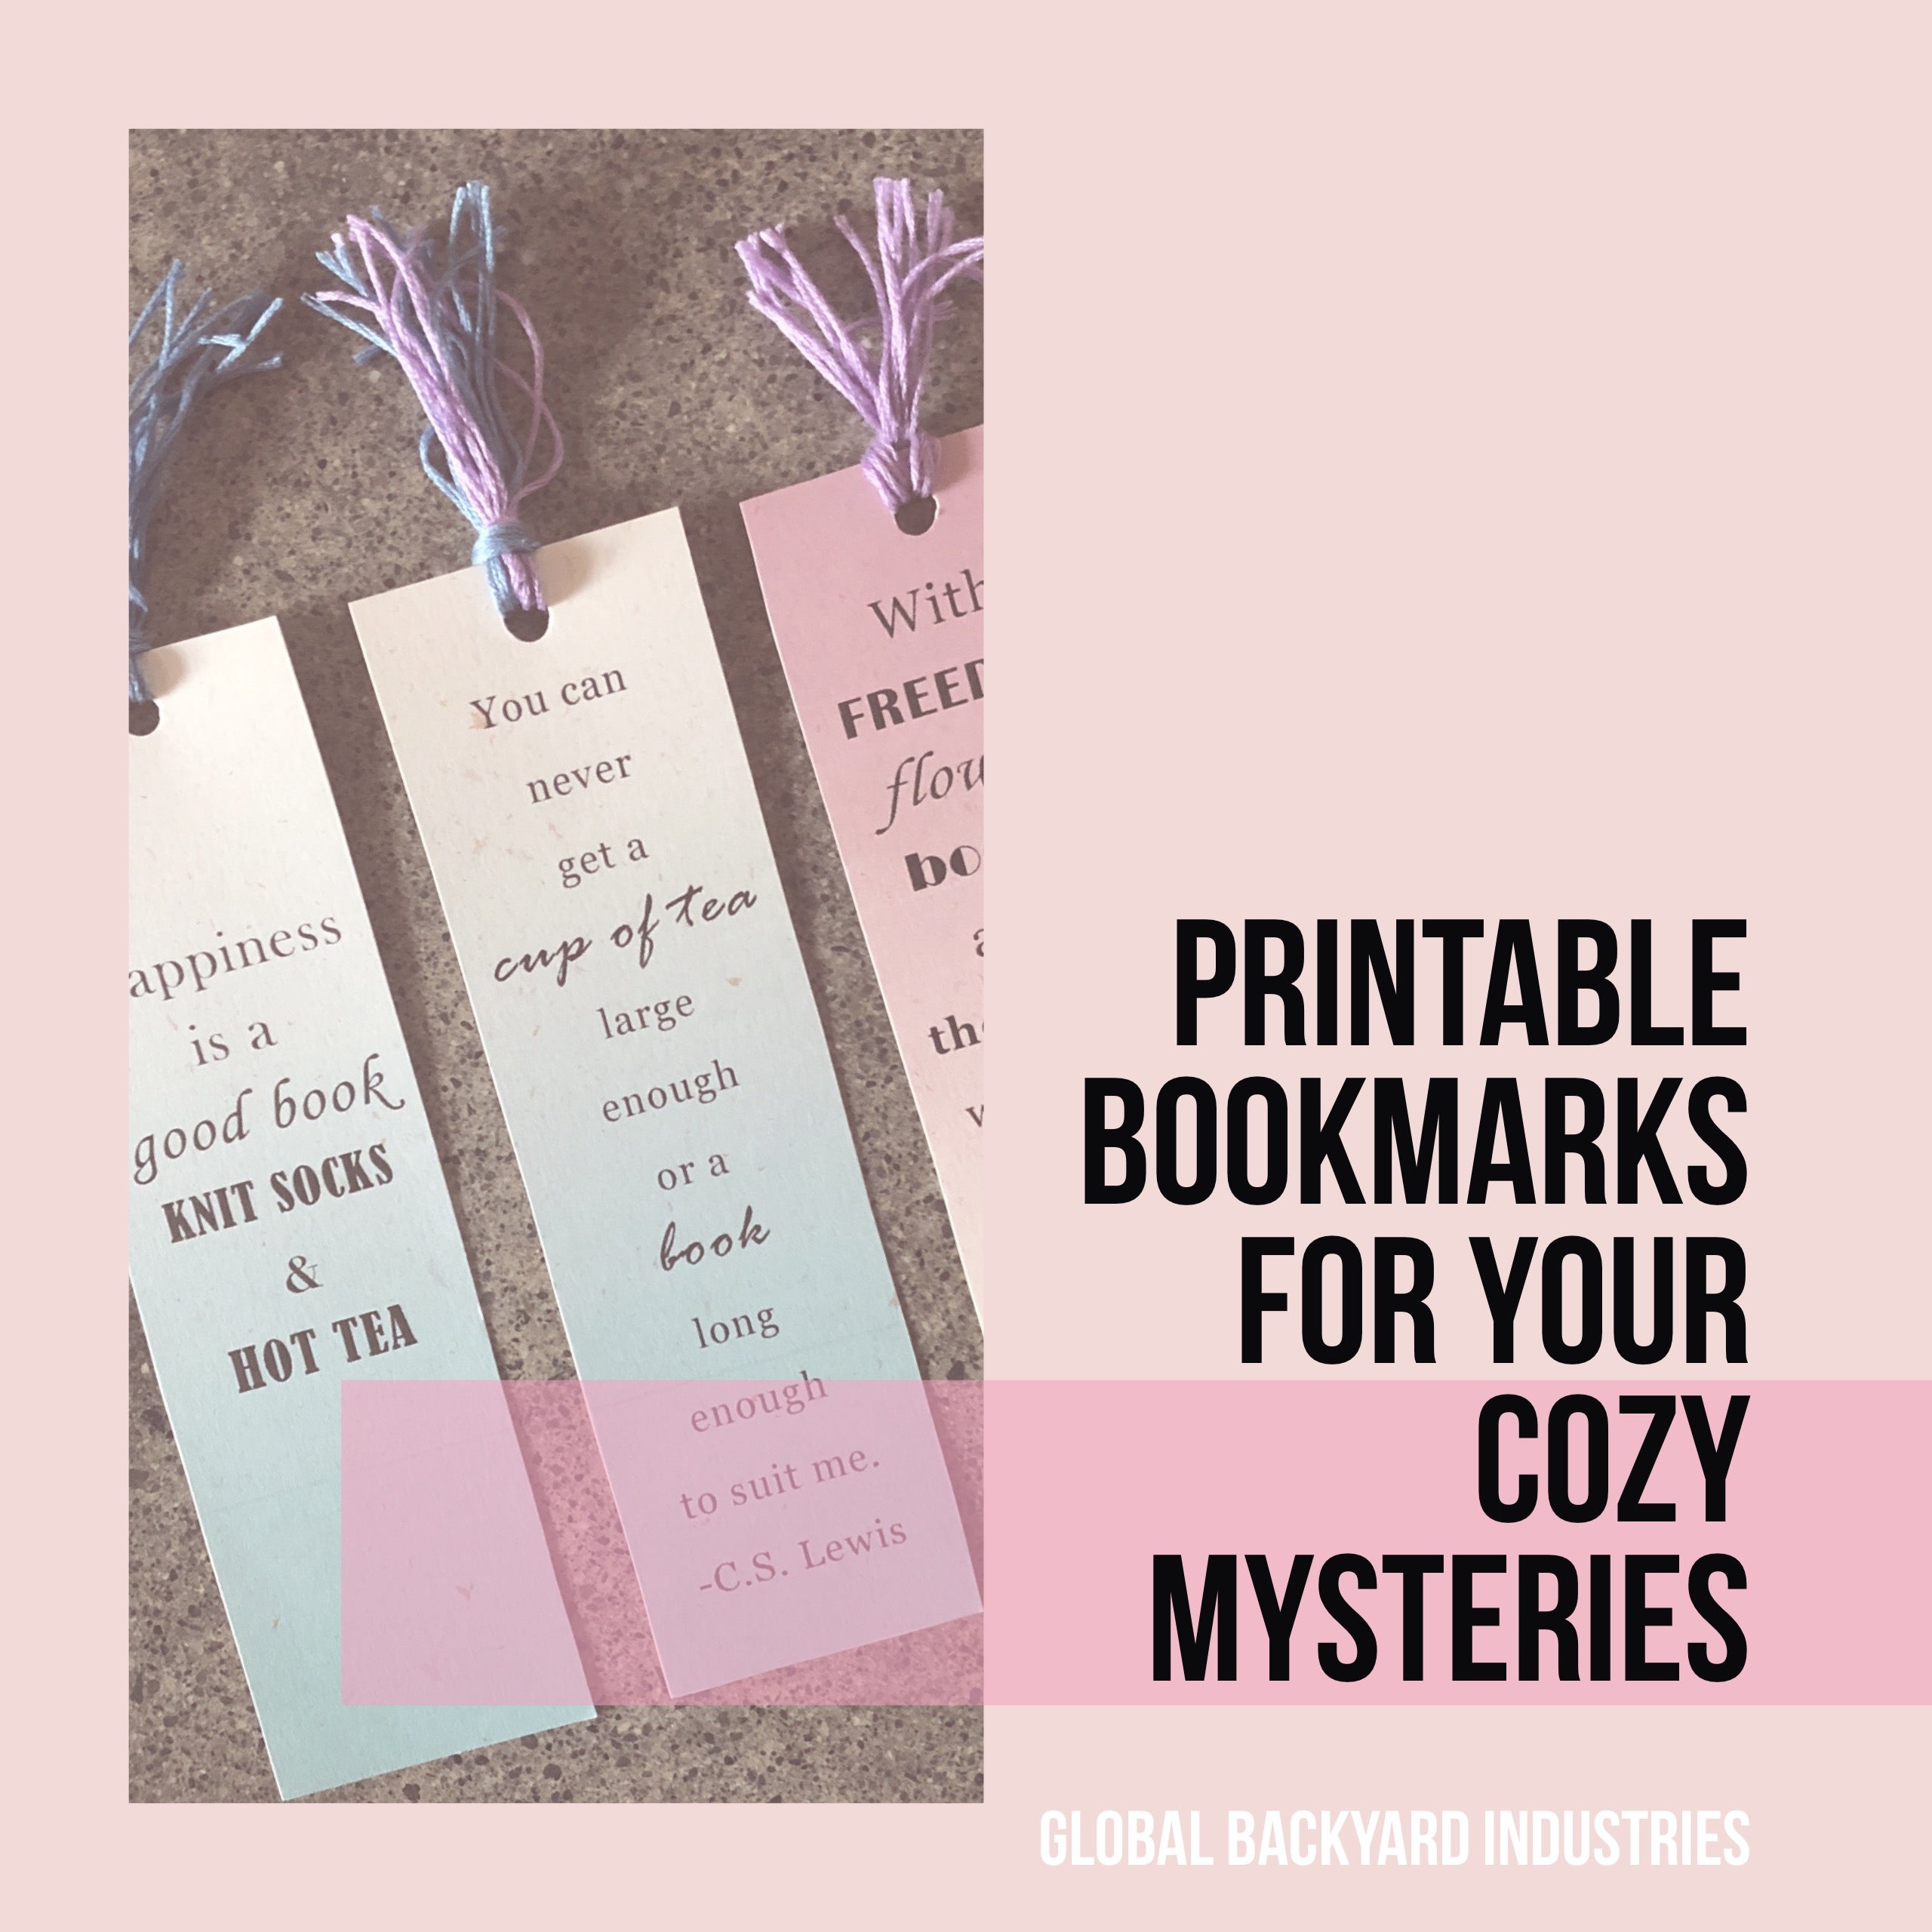 Our 5 Favorite Cozy Mysteries + Free Printable Bookmarks